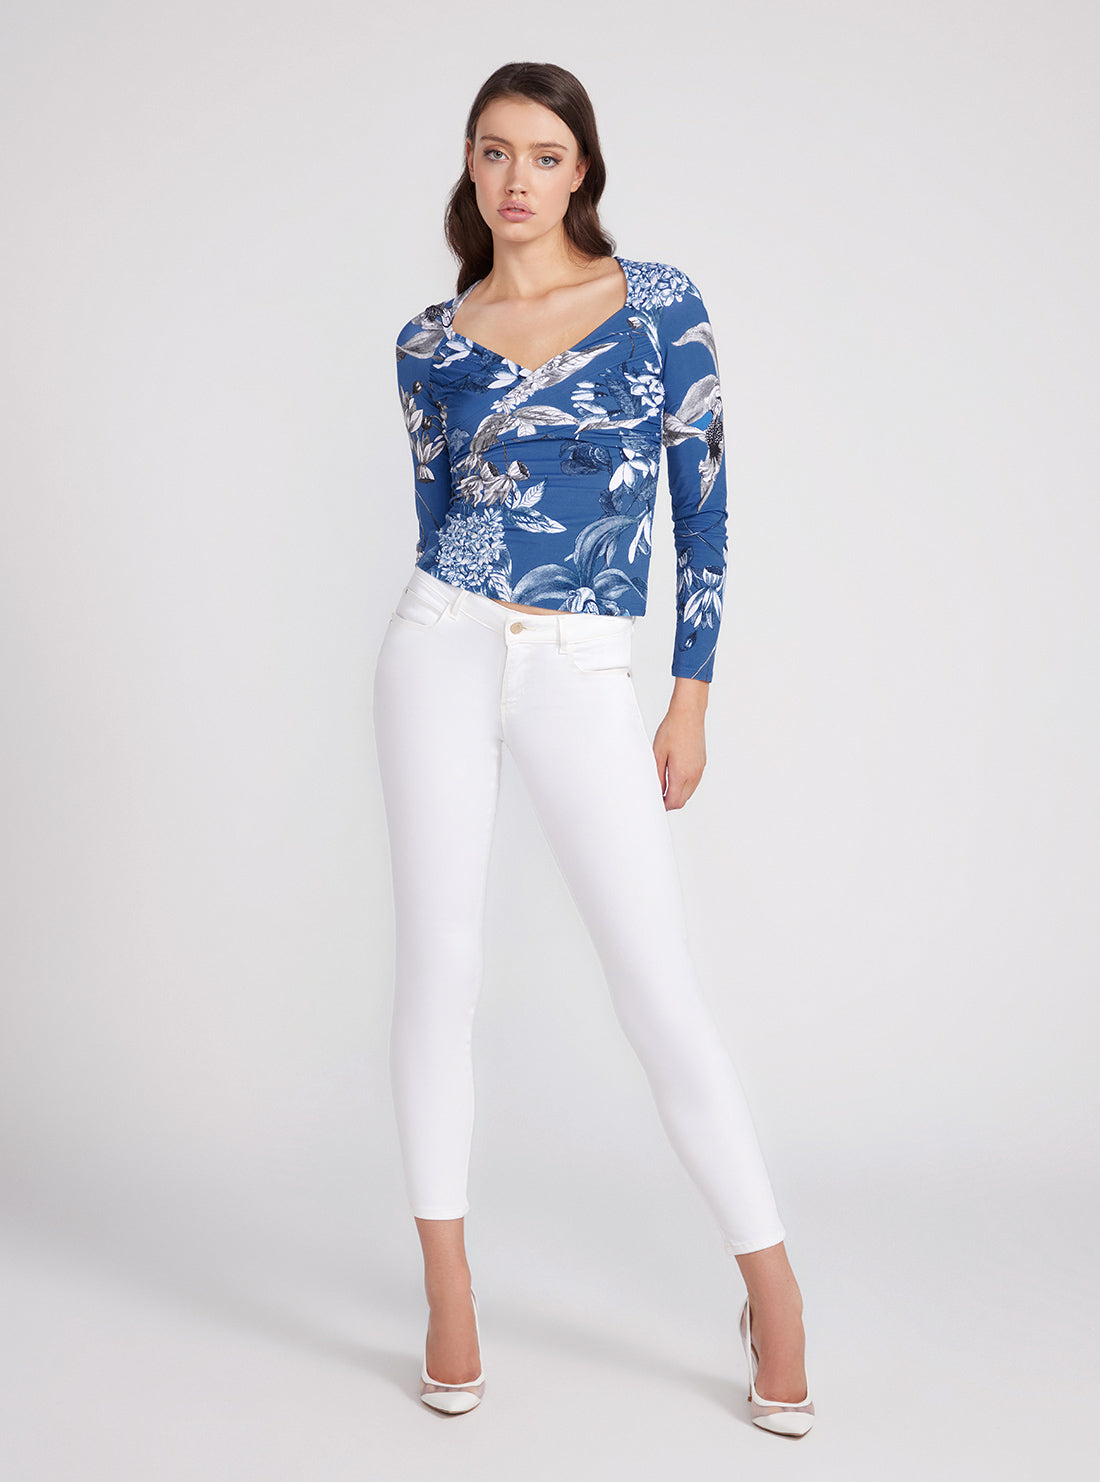 GUESS Blue Floral Print Dianna Long Sleeve Top full view